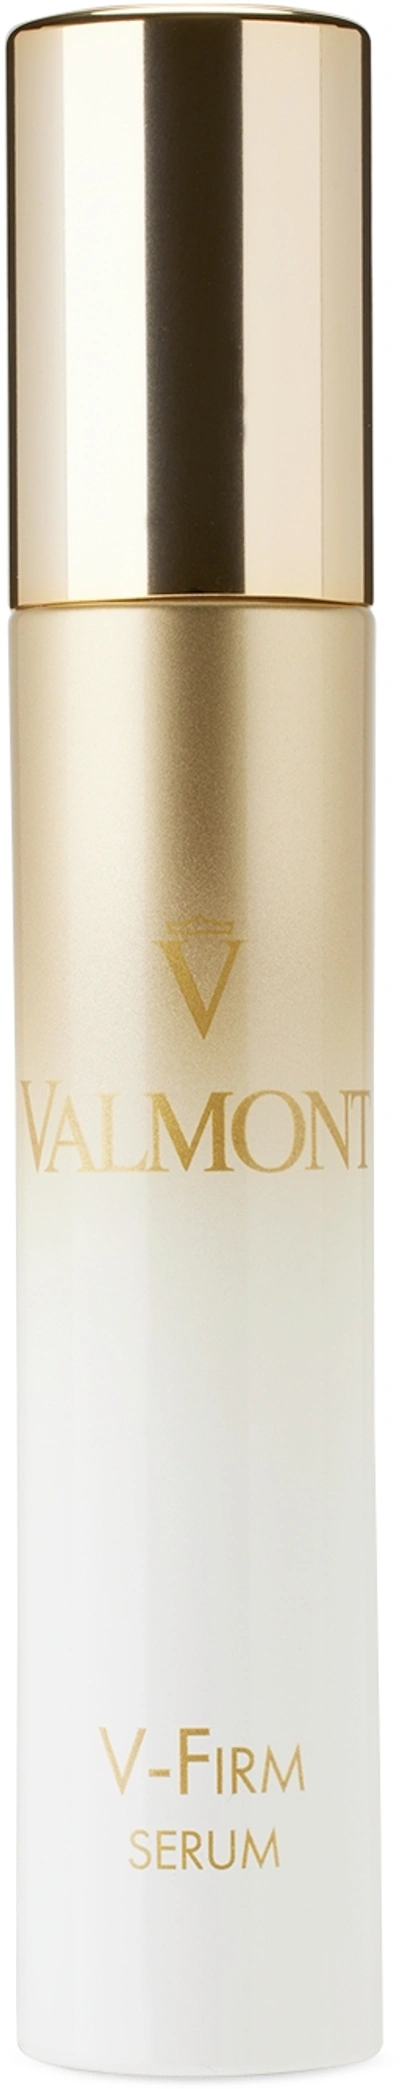 Valmont V-firm Serum, 30 ml In Na